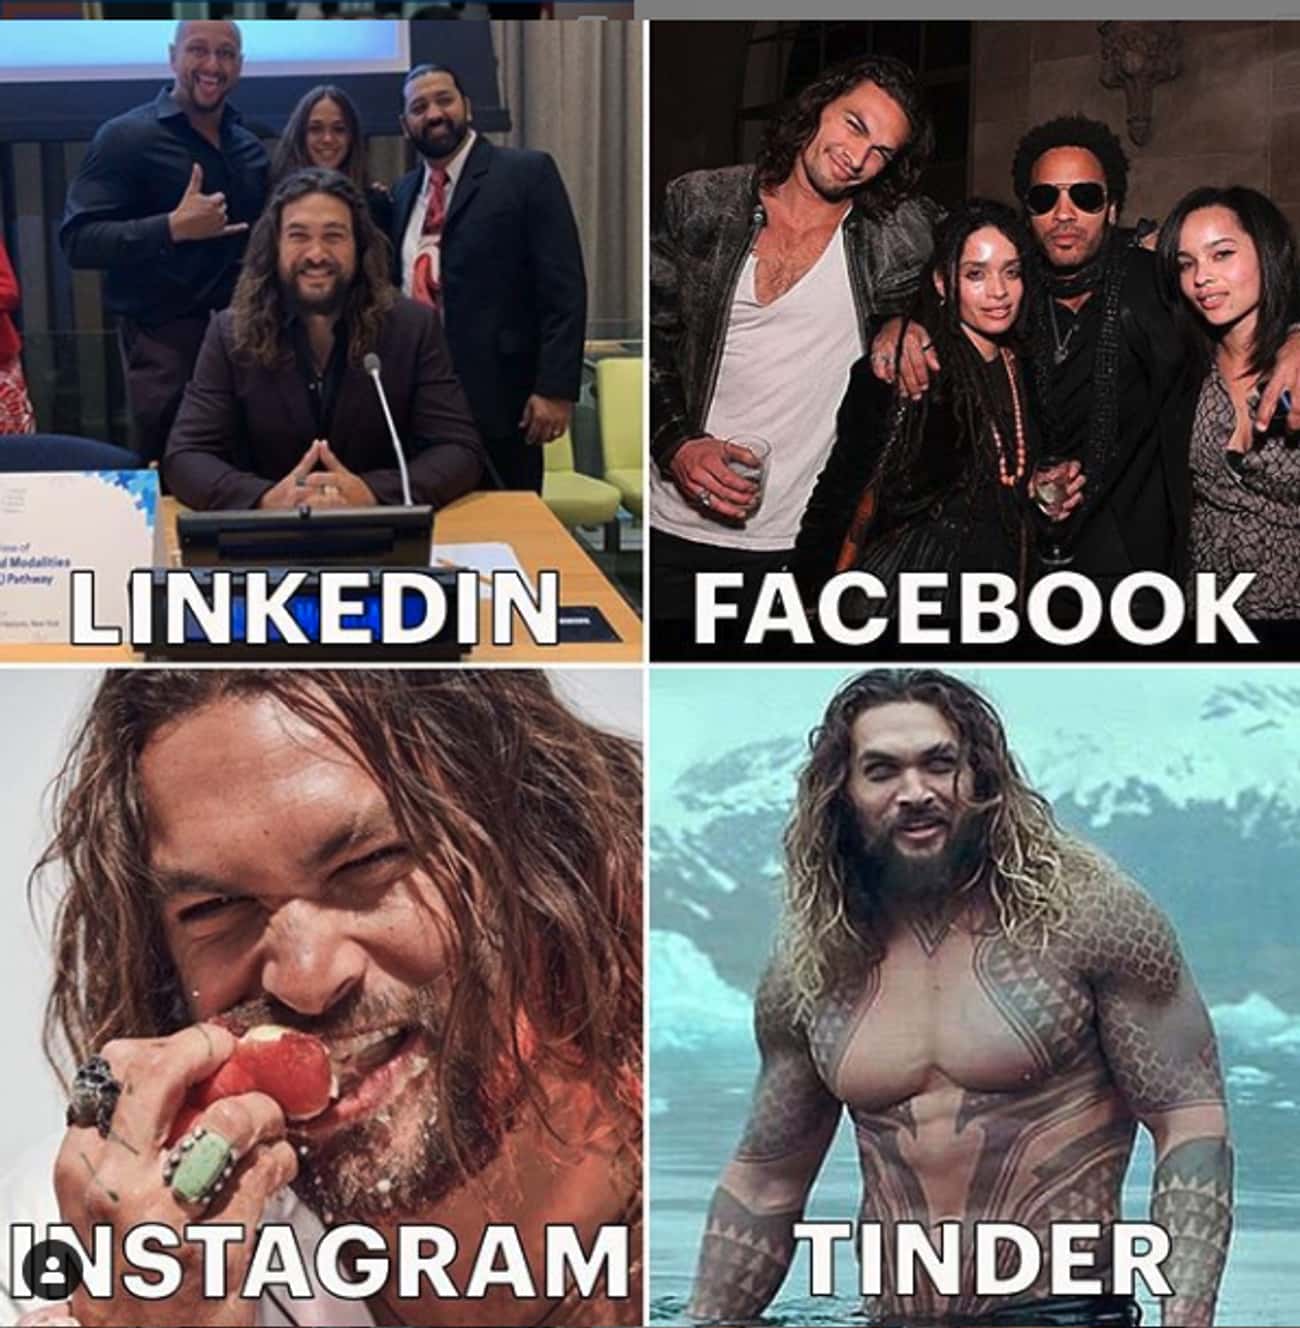 The Daily Mail Had Time To Make One For Jason Momoa